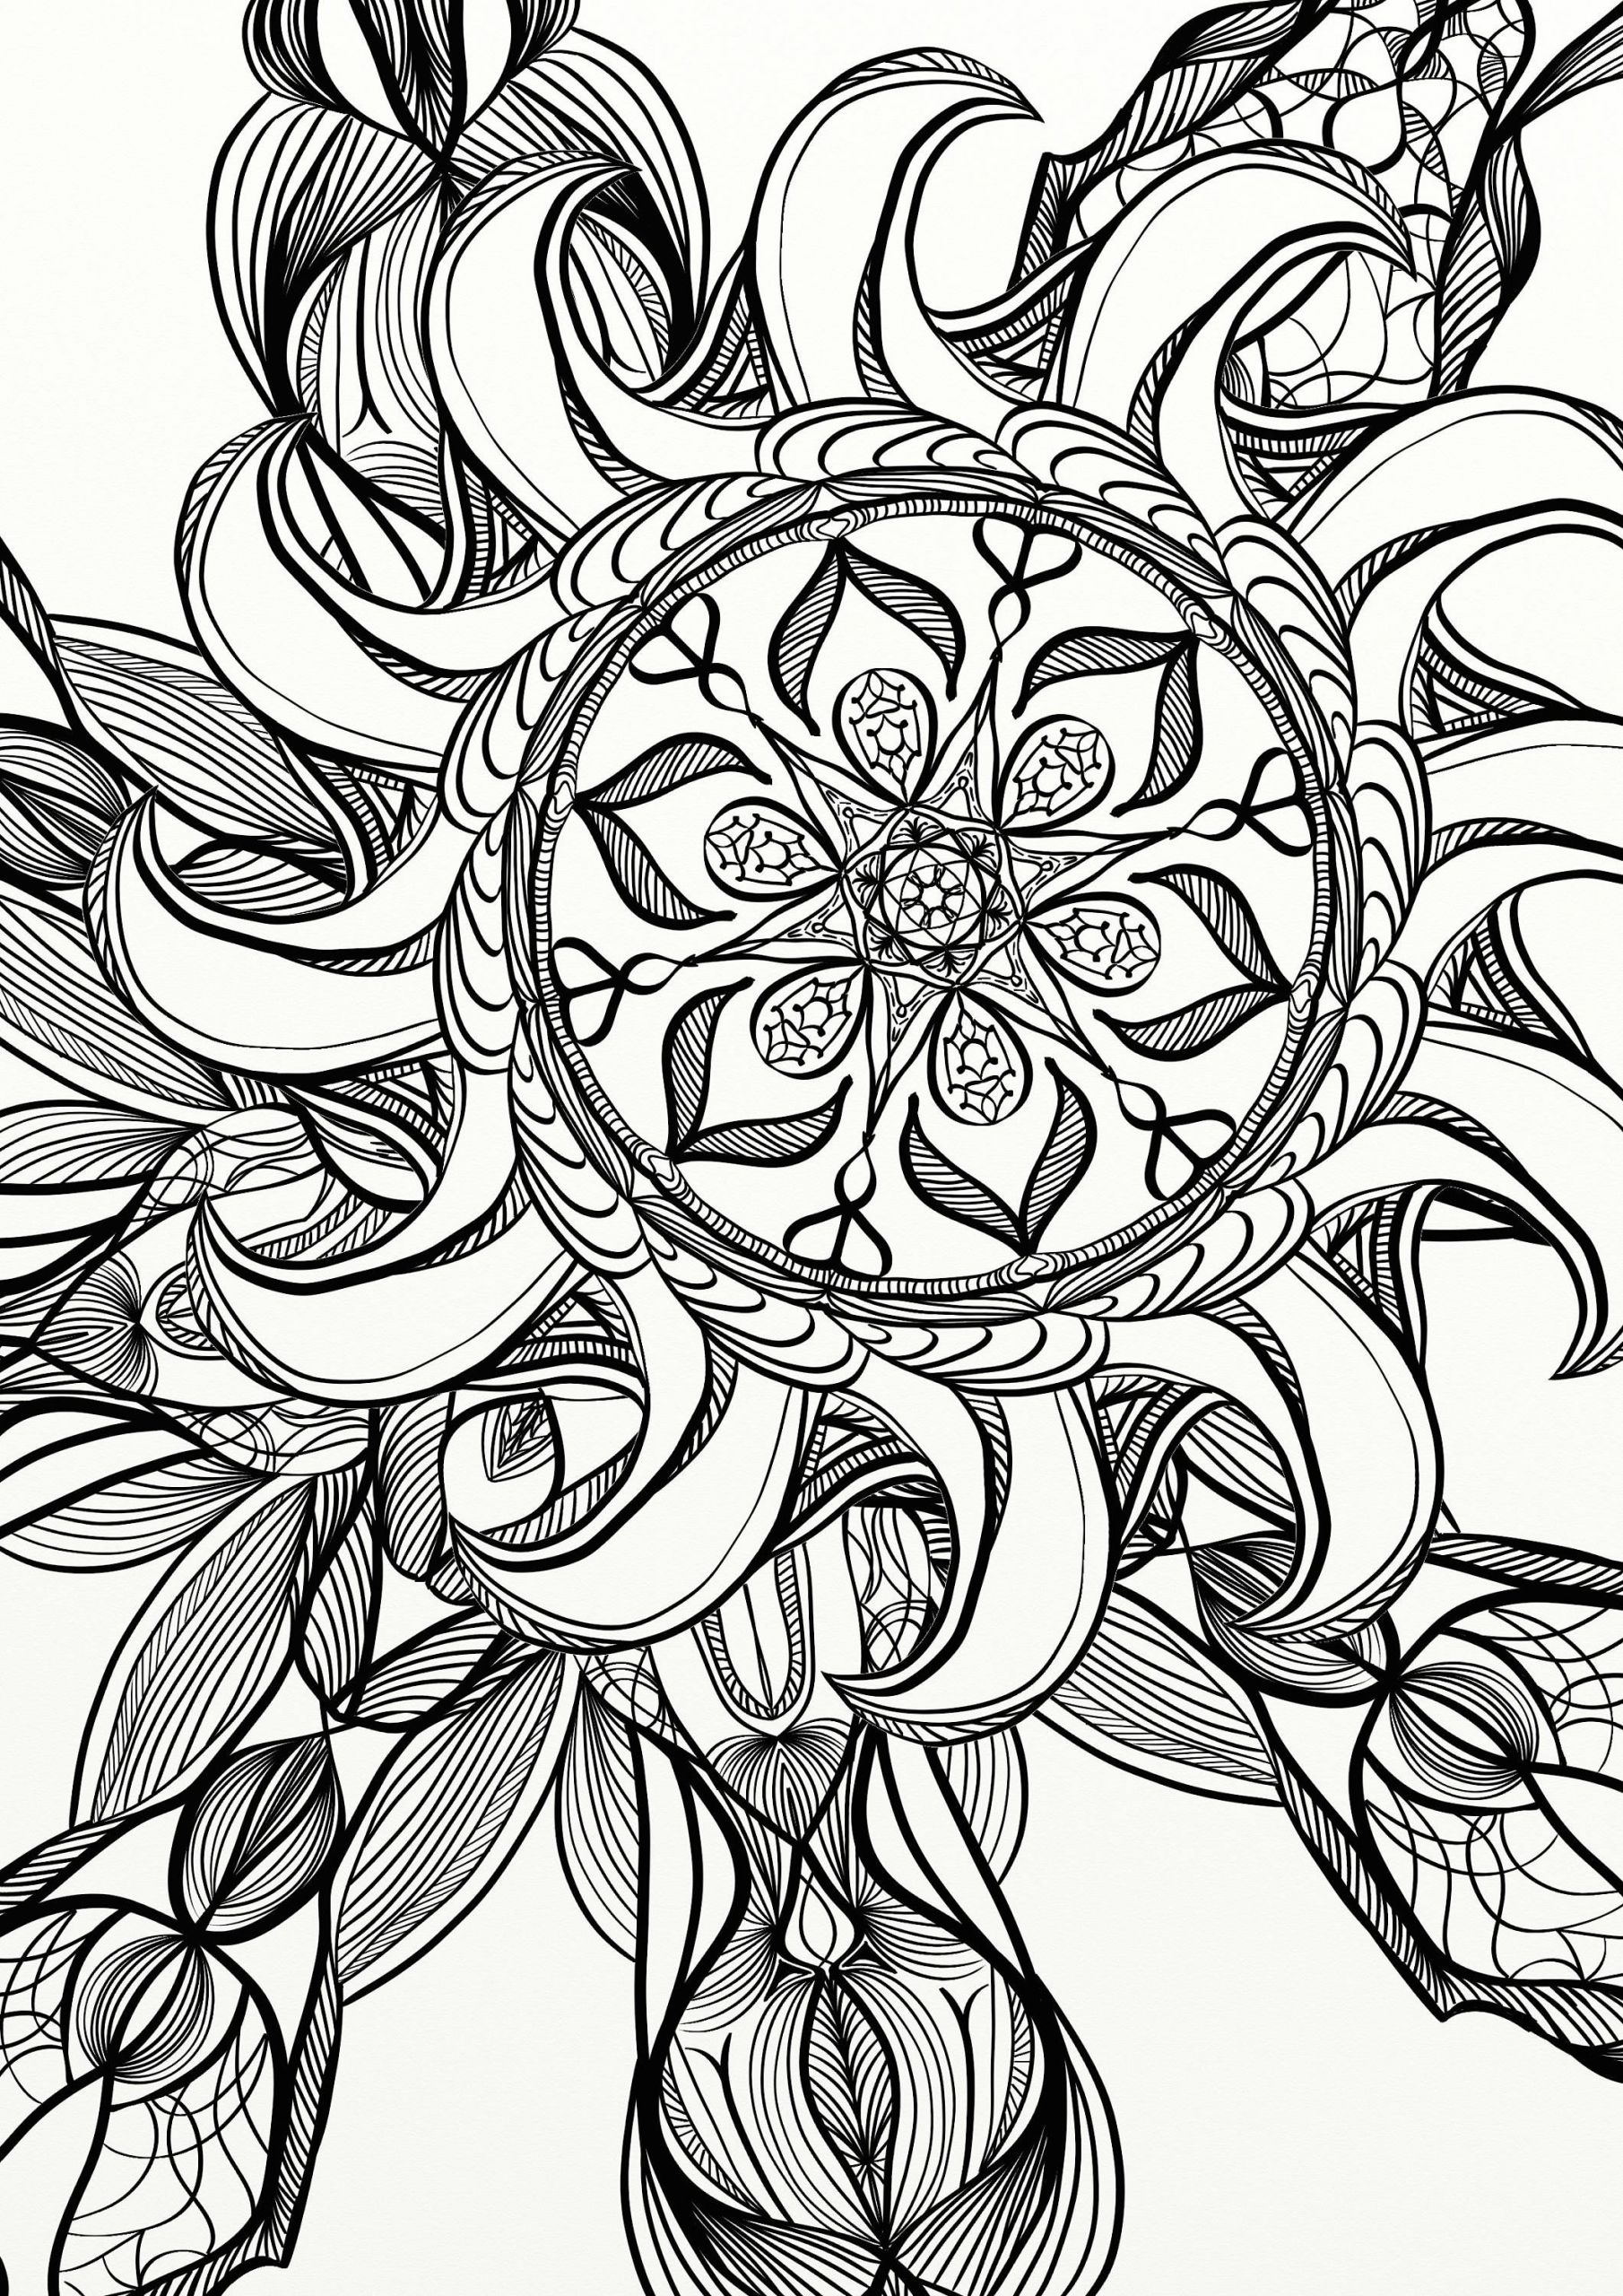 Coloring Pages Adult
 Mandala Spiral Relaxing Adult Coloring Page